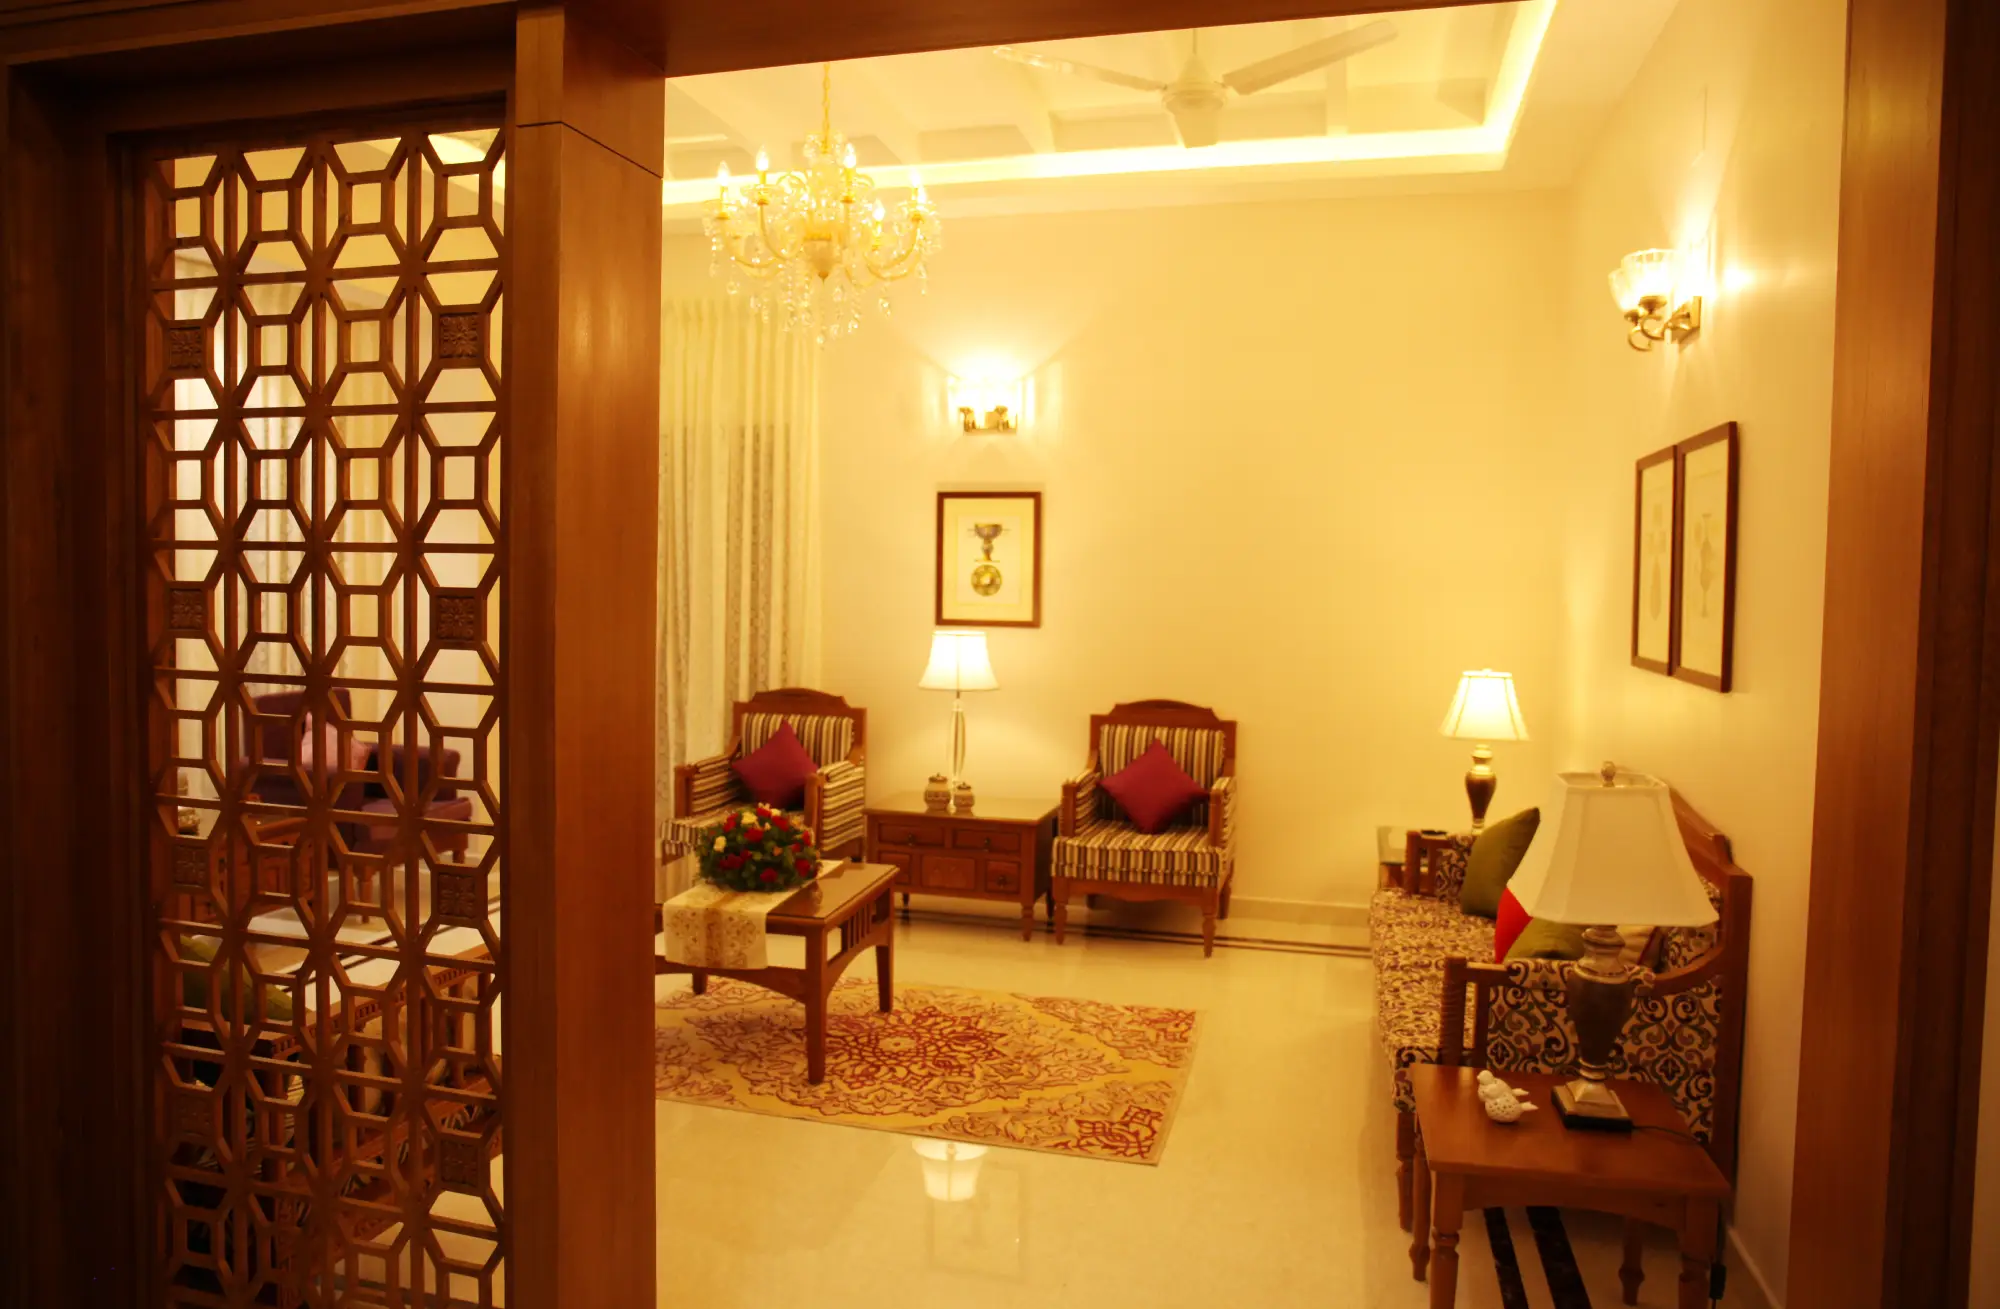 a brightly lit living room's entrance